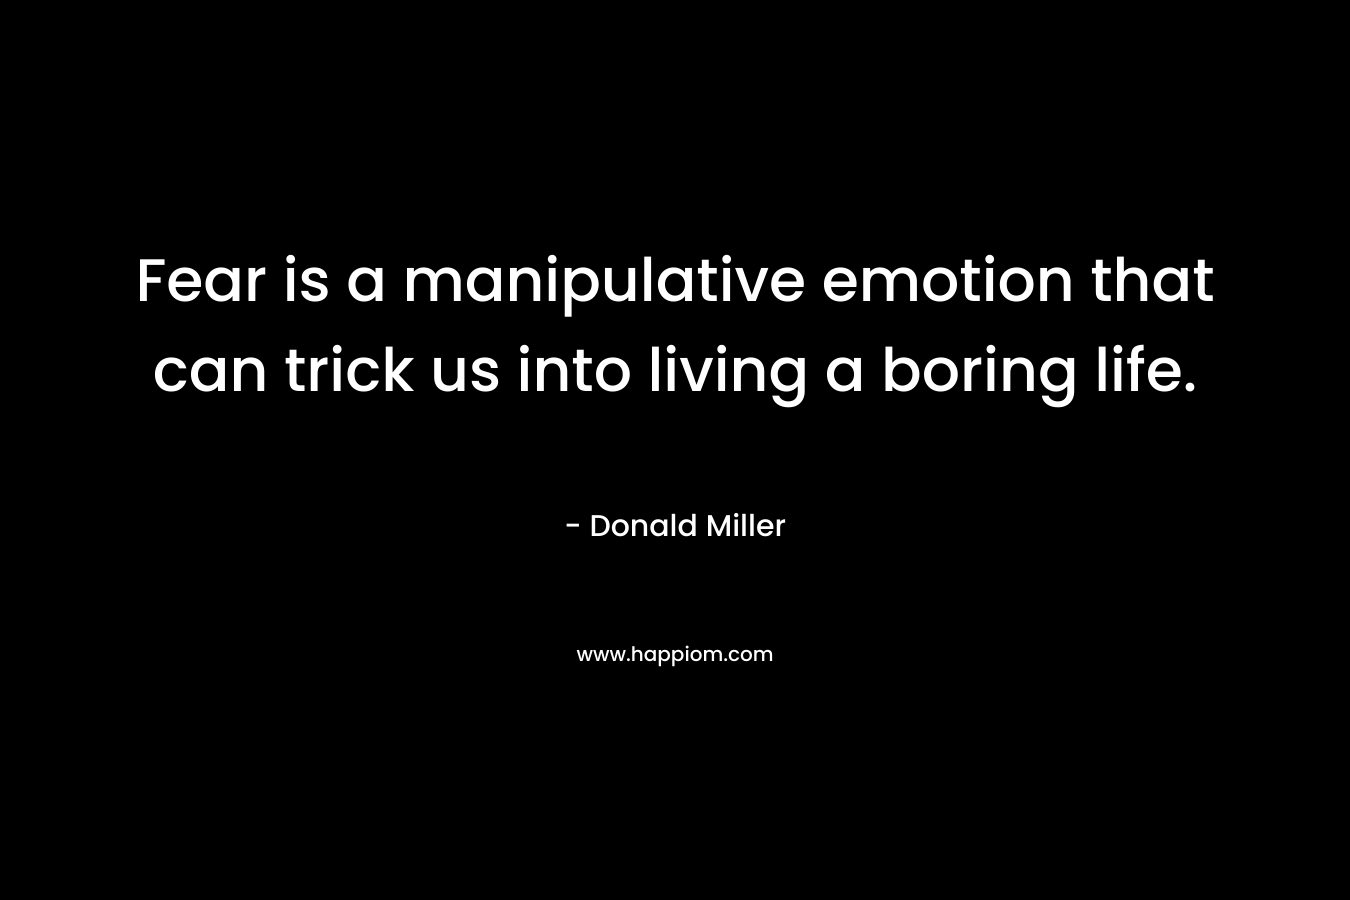 Fear is a manipulative emotion that can trick us into living a boring life.